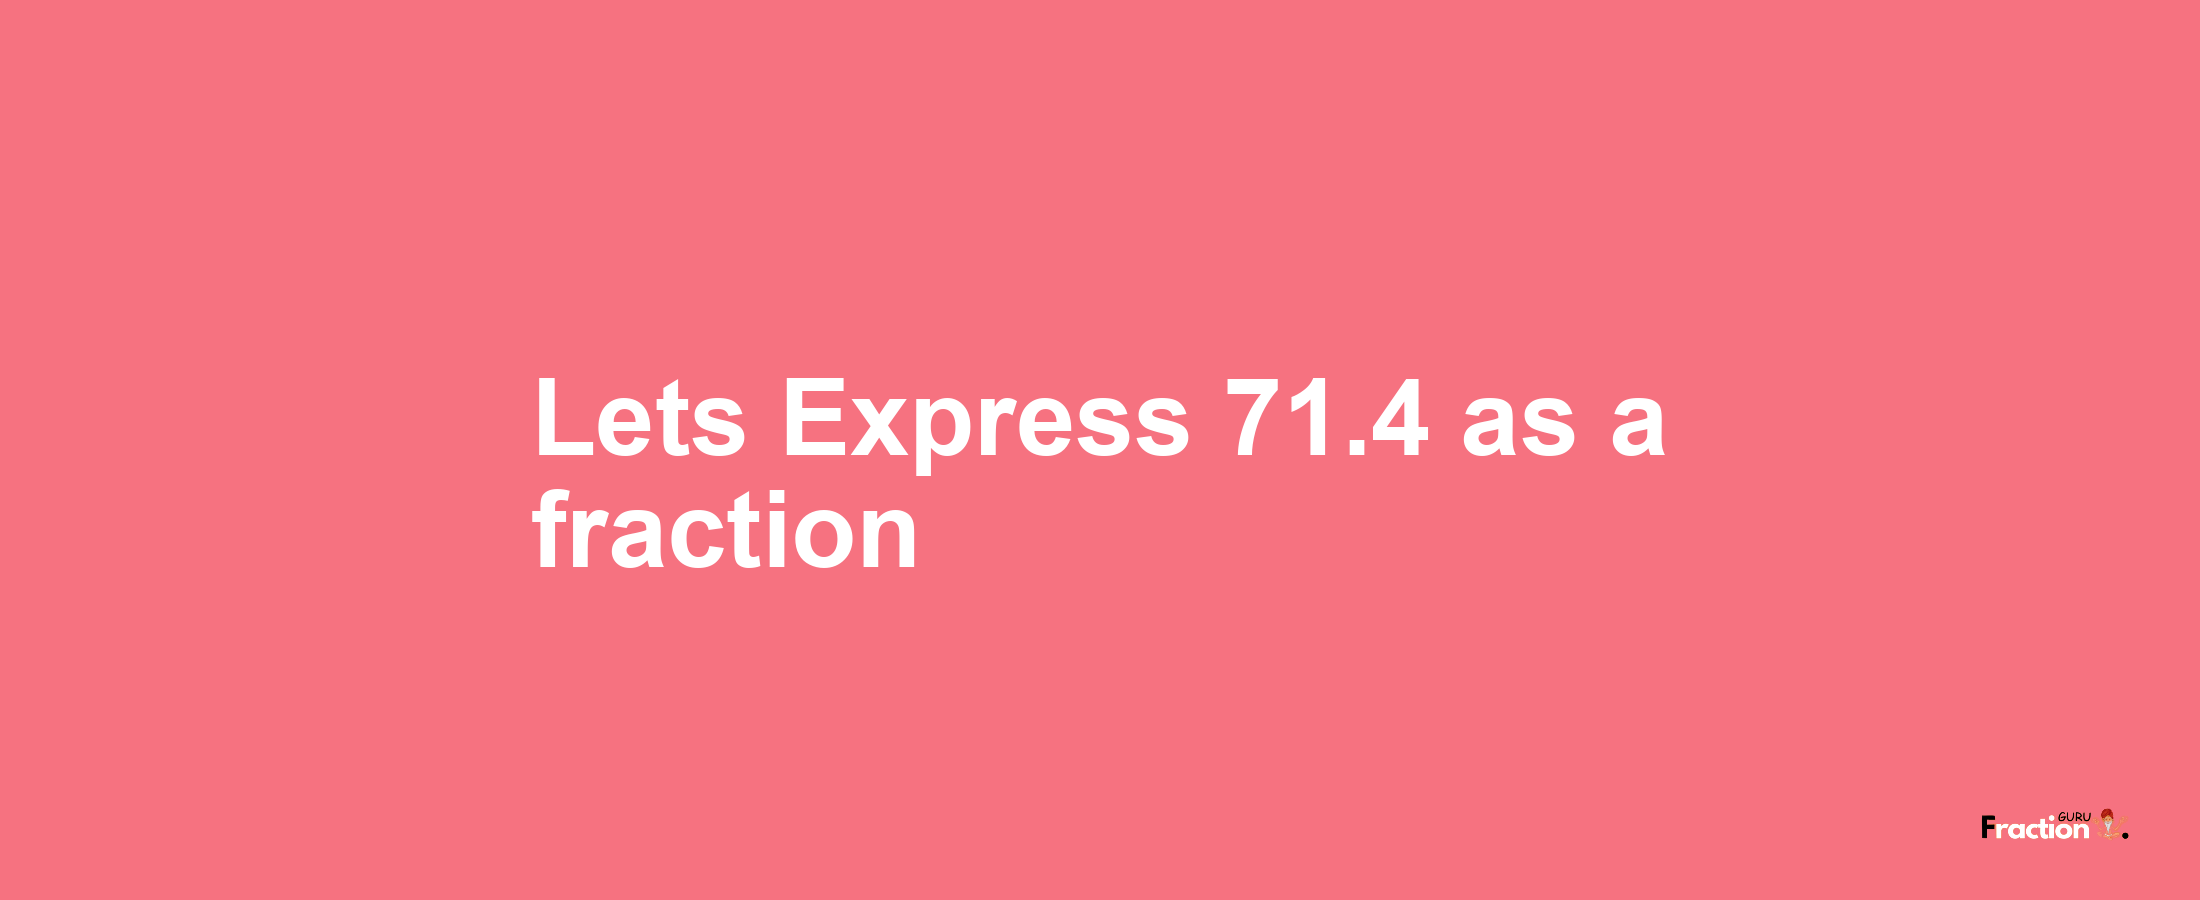 Lets Express 71.4 as afraction